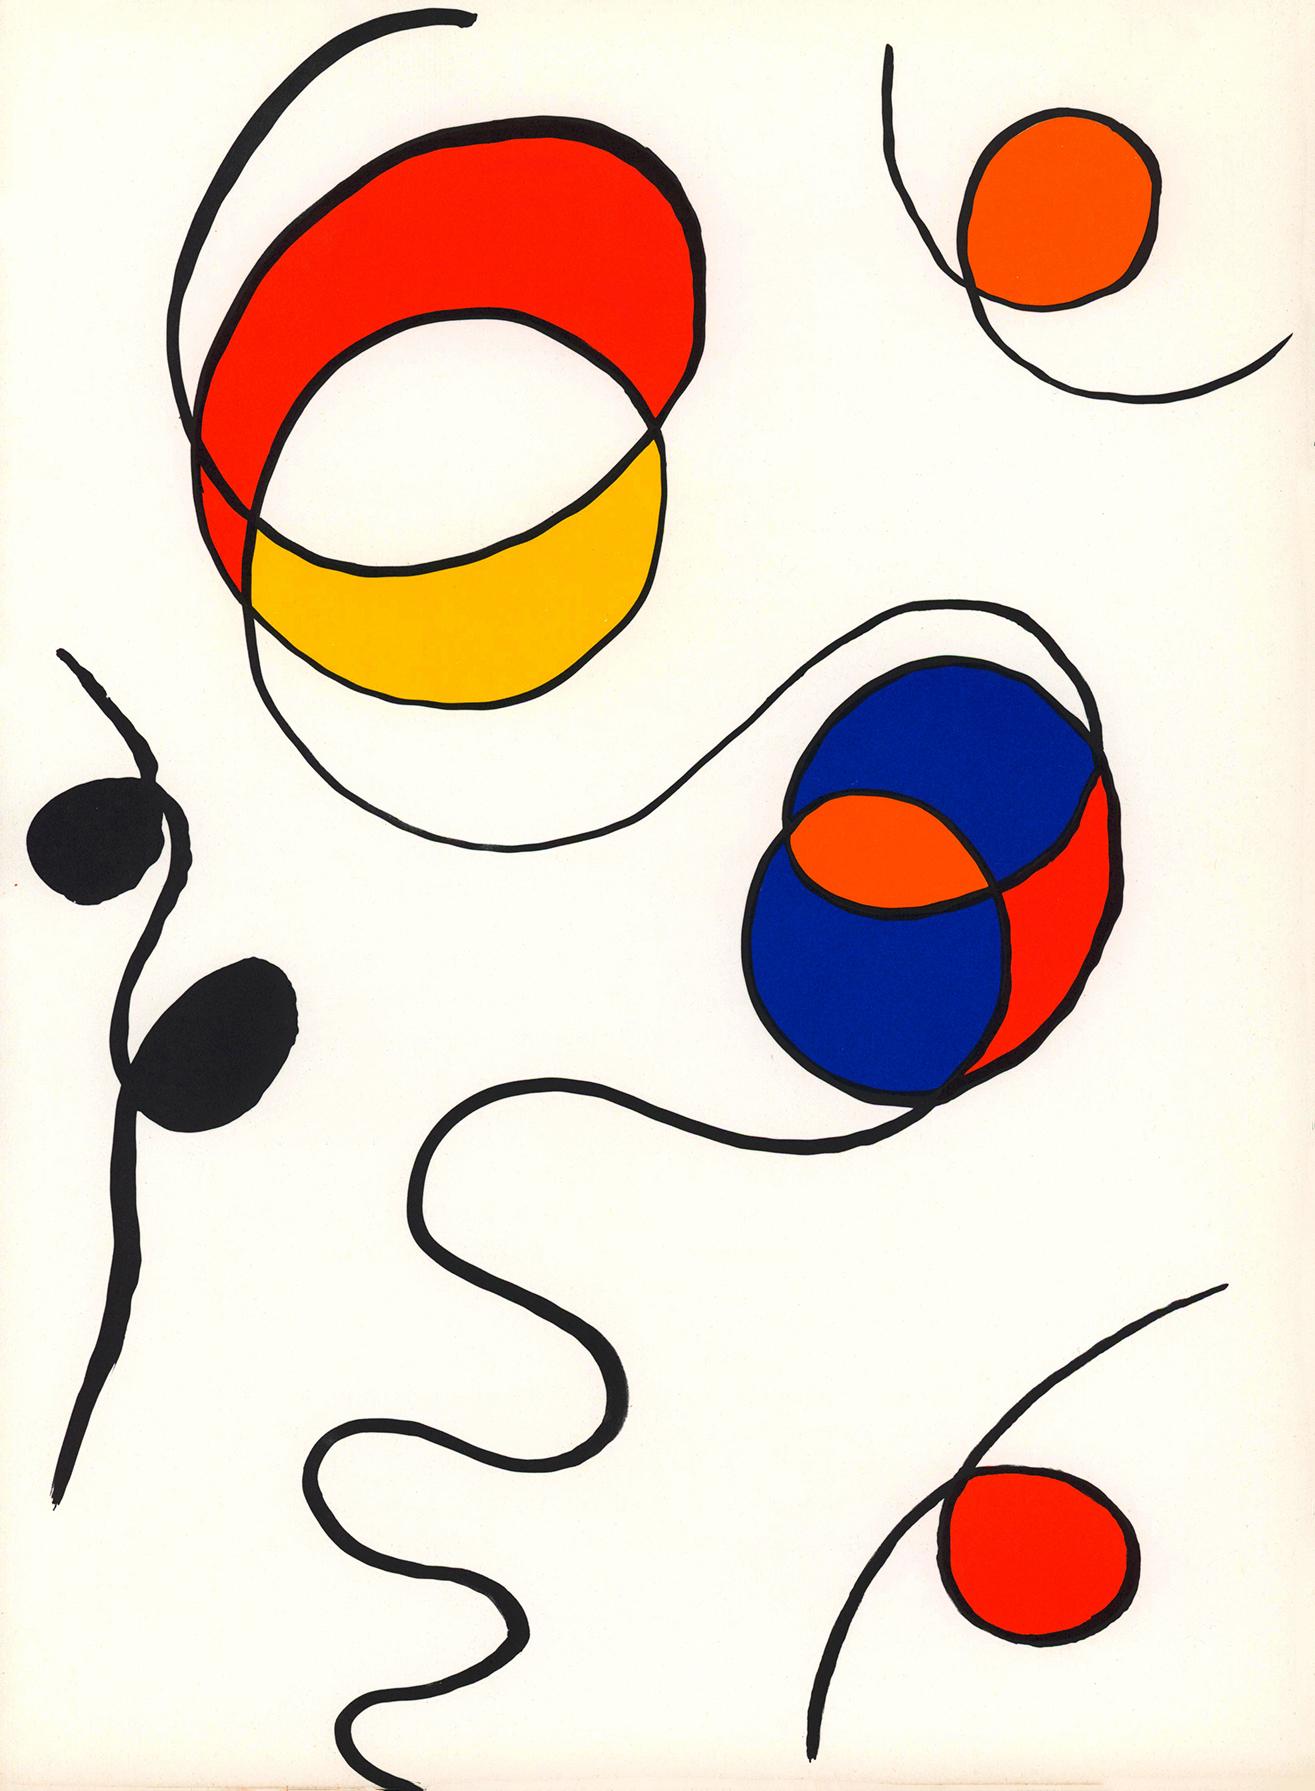 Vintage original 1960s Alexander Calder lithograph from Derriere le Miroir:

Dimensions: 11 x 15 inches.

Minor signs of handling; good overall vintage condition with well preserved colors.

Unsigned from an edition of unknown. Sold unframed.